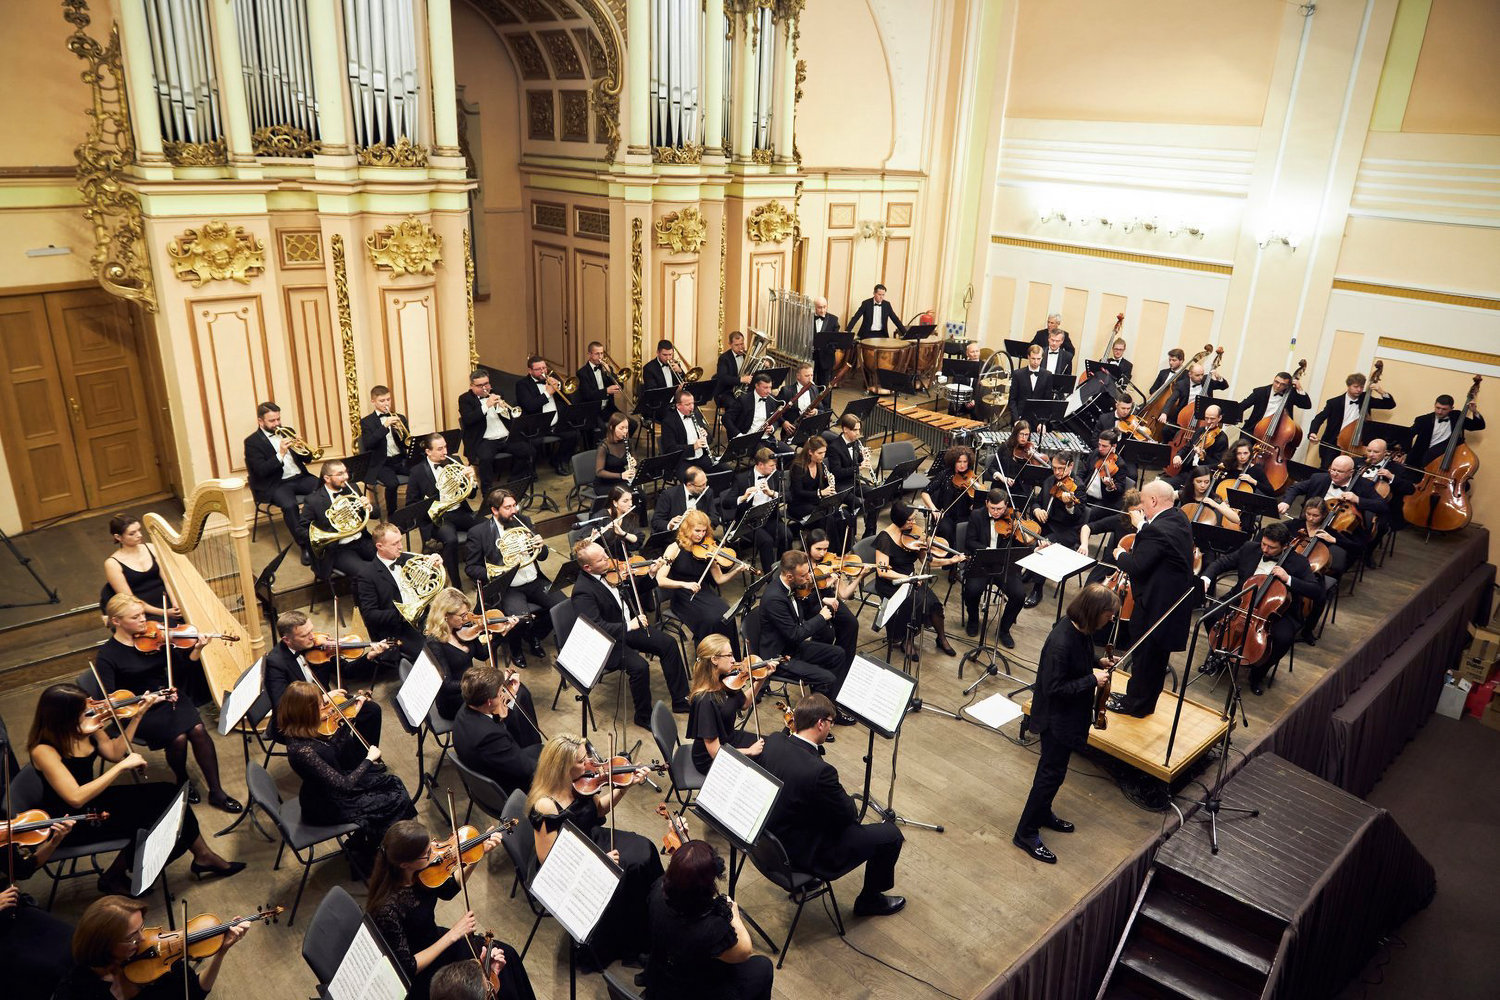 Lviv National Philharmonic Orchestra of Ukraine will perform Sunday, Feb. 19 at 4 p.m with compositions of Brahms and Sibelius. The orchestra is based out of the medieval city of Lviv and established in 1902. Its first concert took place in the Philharmonic Theatre of Count Stanislav Skarbko.